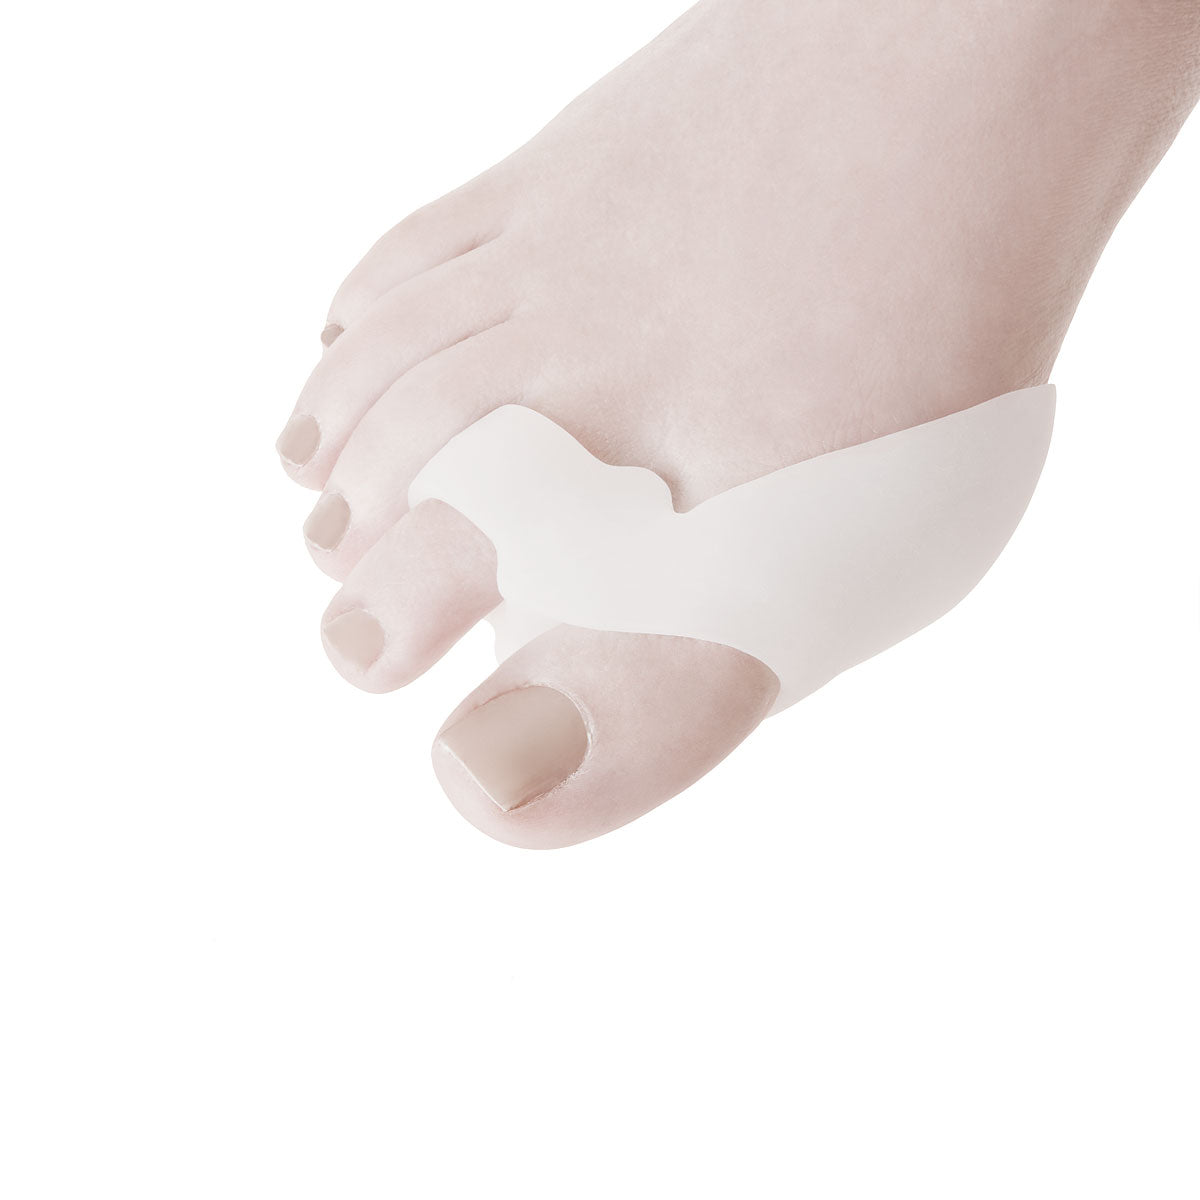 DJMed Bunion Protector & Toe Spacer - 1 Pad